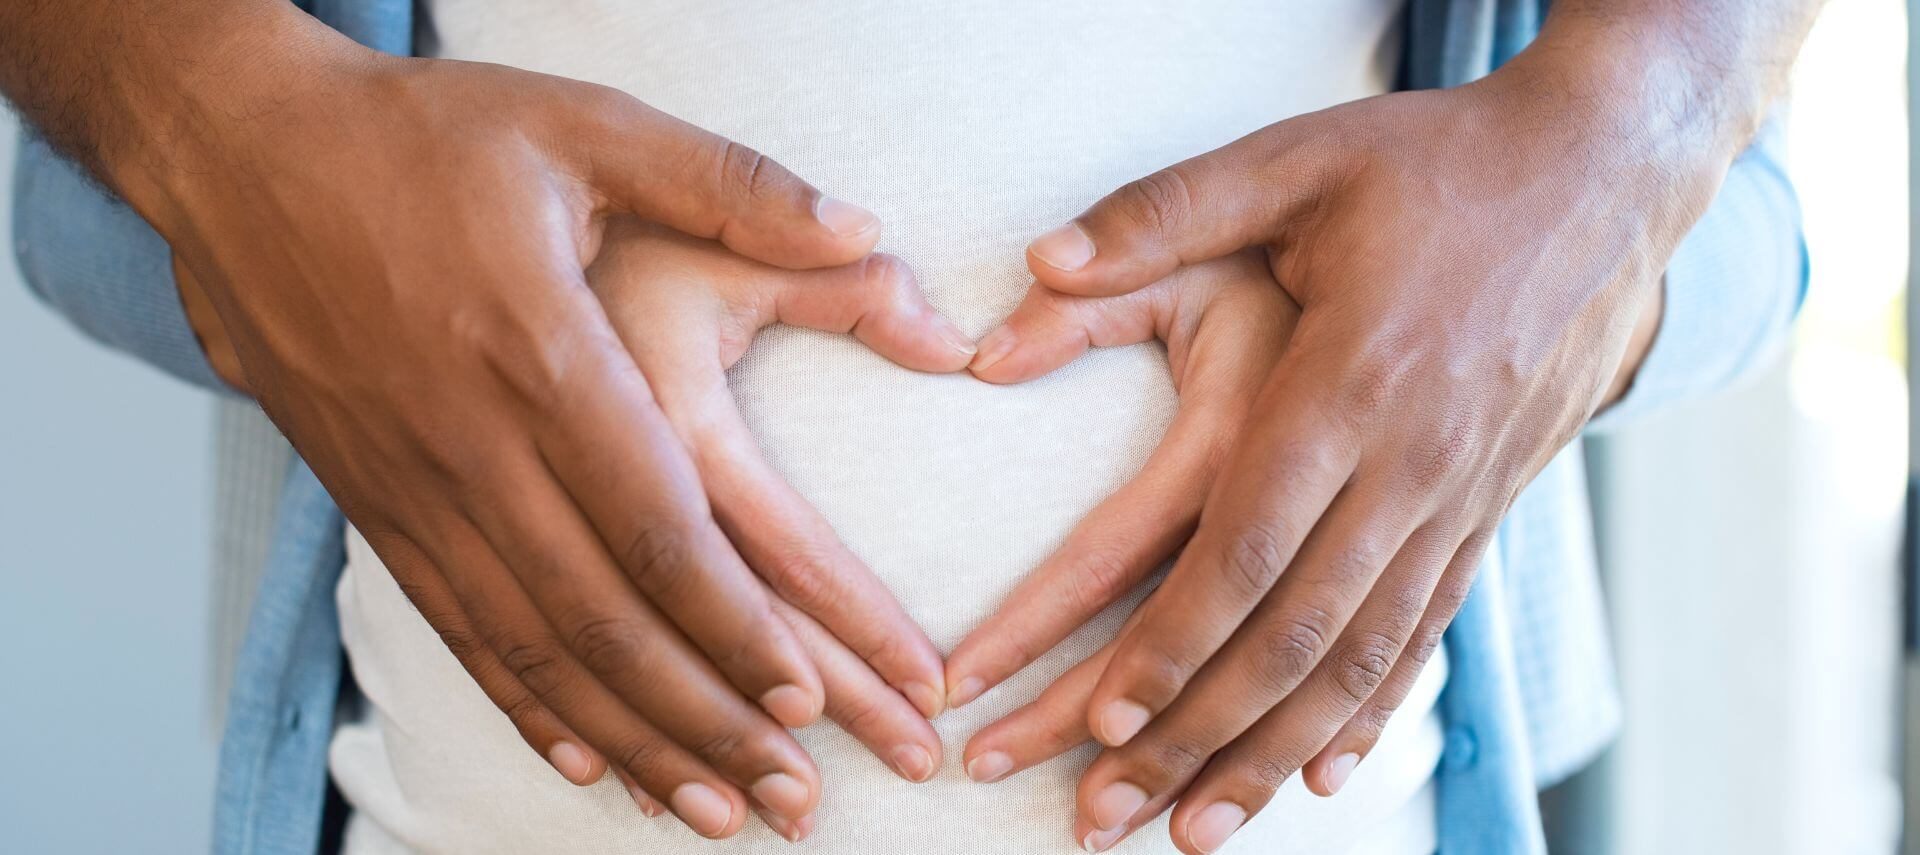 Man and woman’s hands on pregnant tummy shaped like a heart